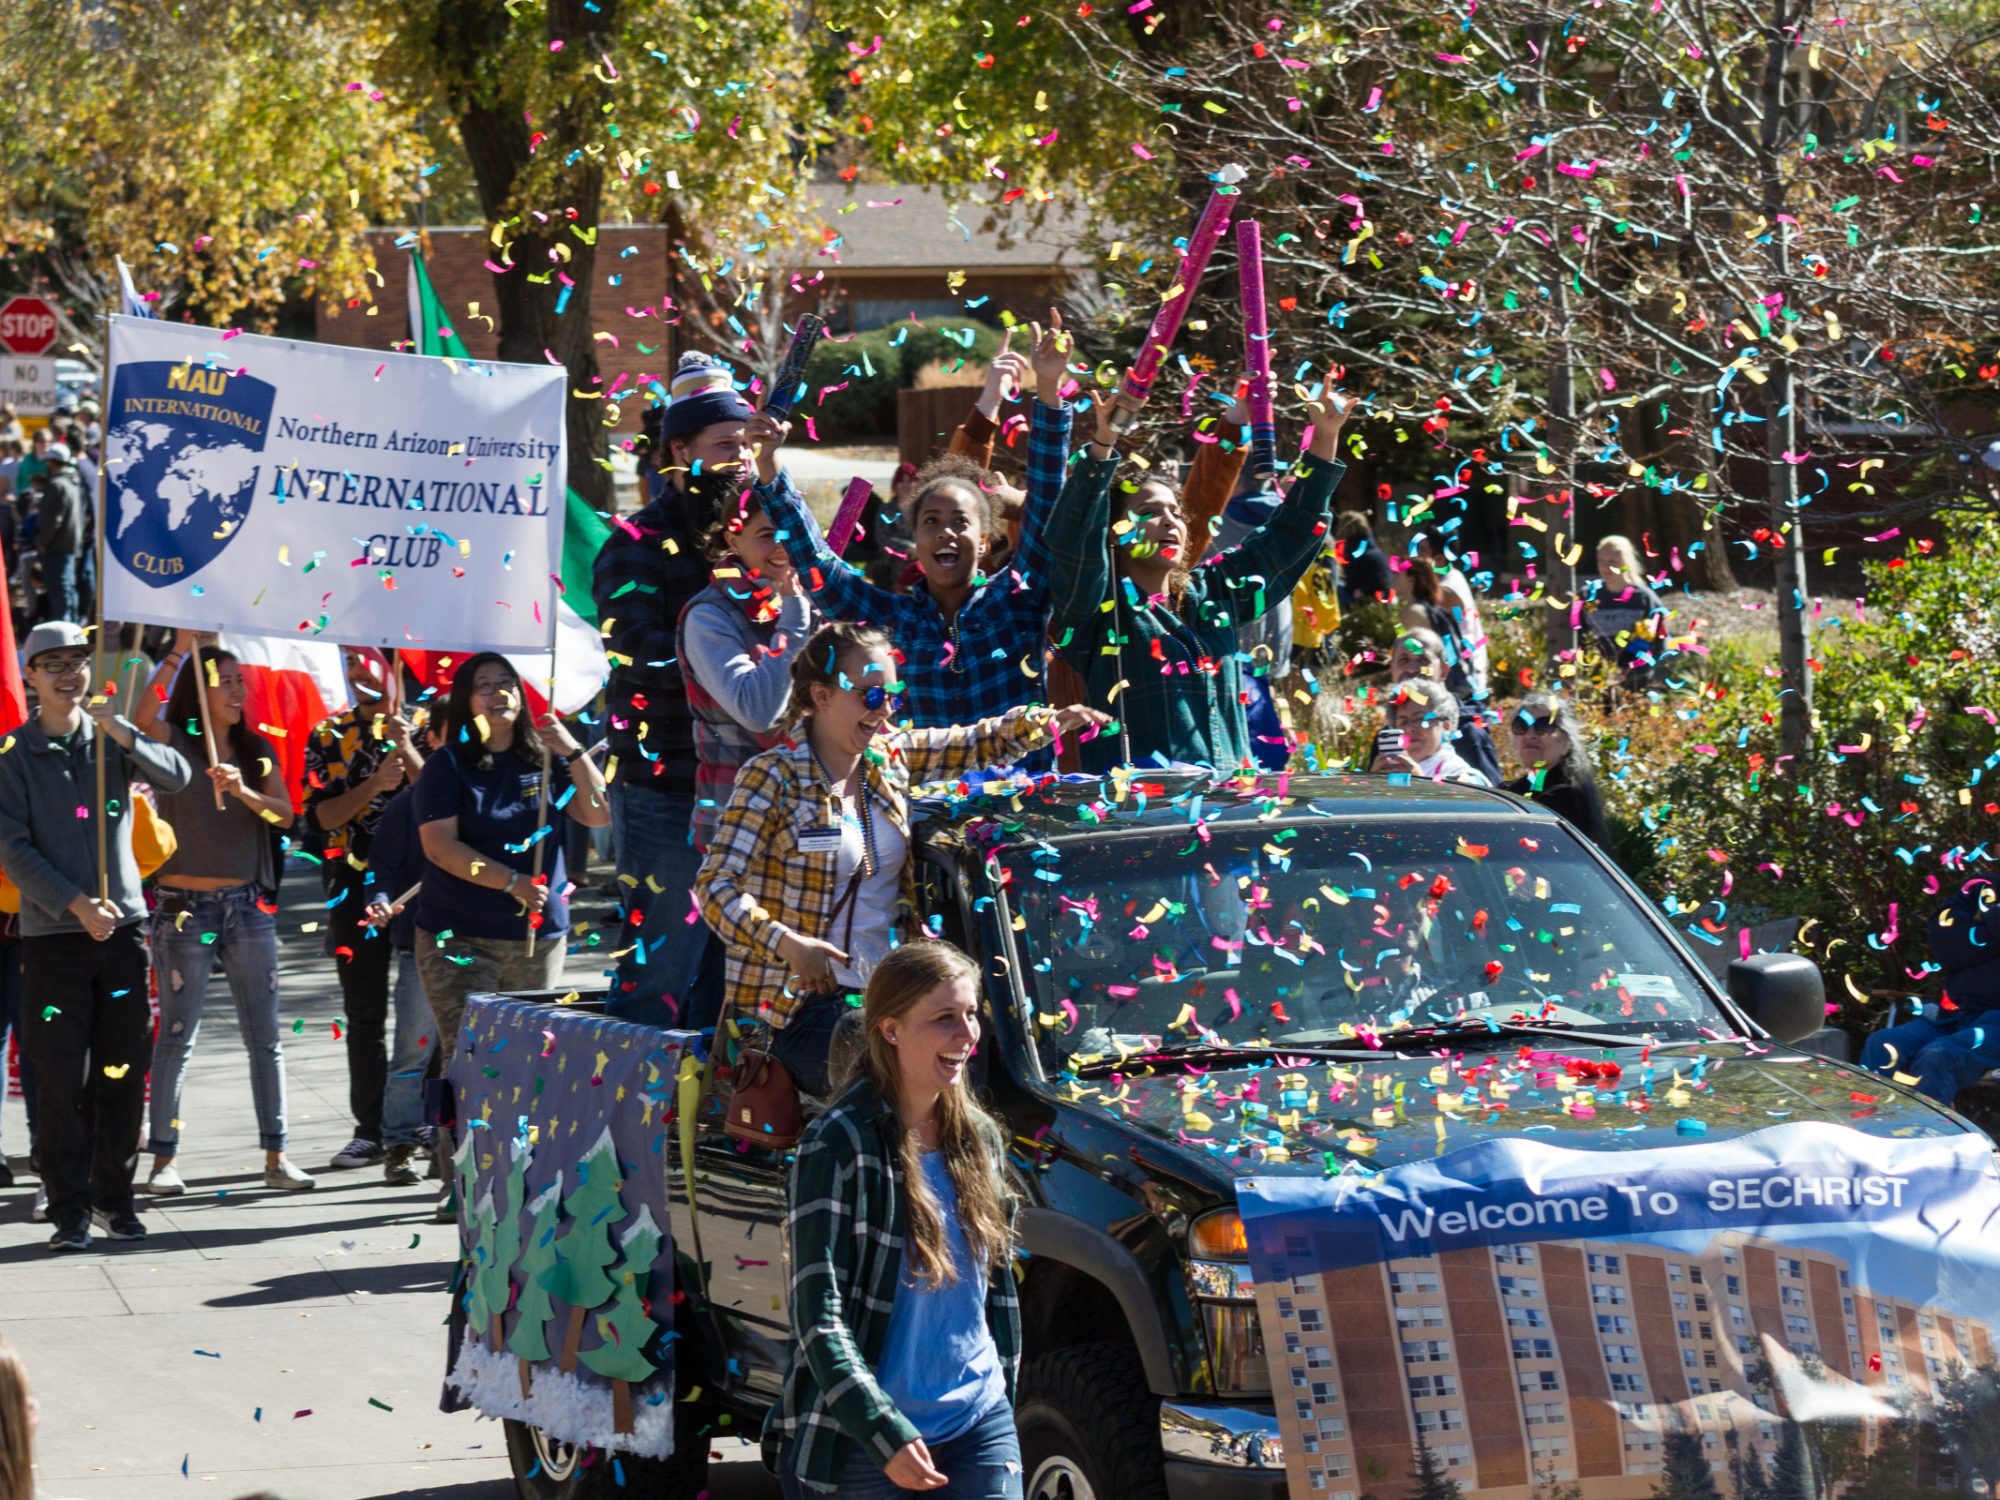 N A U international club smiling and marching the homecoming parade with art work on a truck and confetti everywhere.